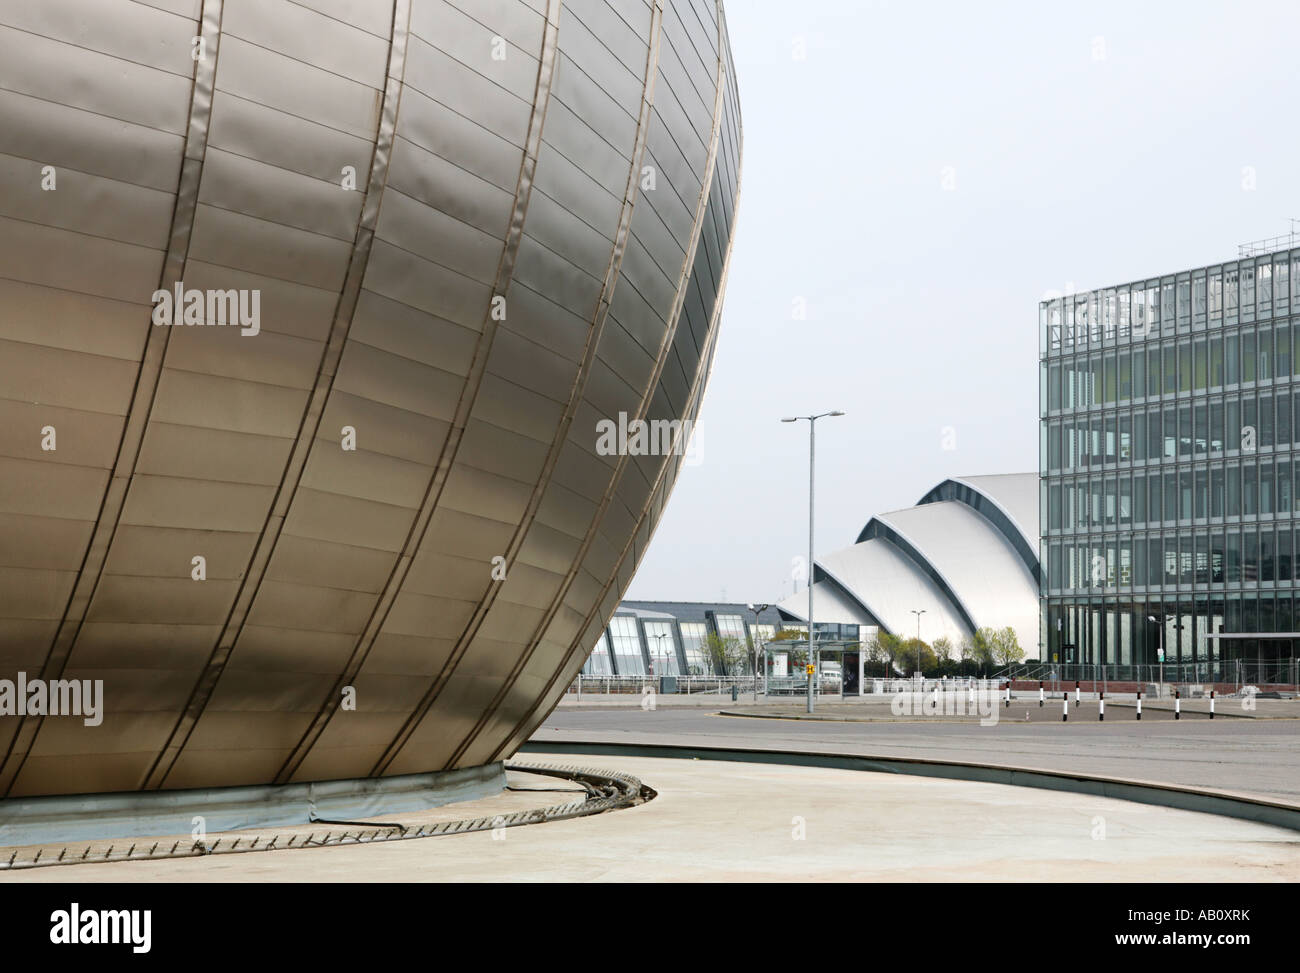 Artistically composed image of the Glasgow Science Centre SECC and BBC building Stock Photo